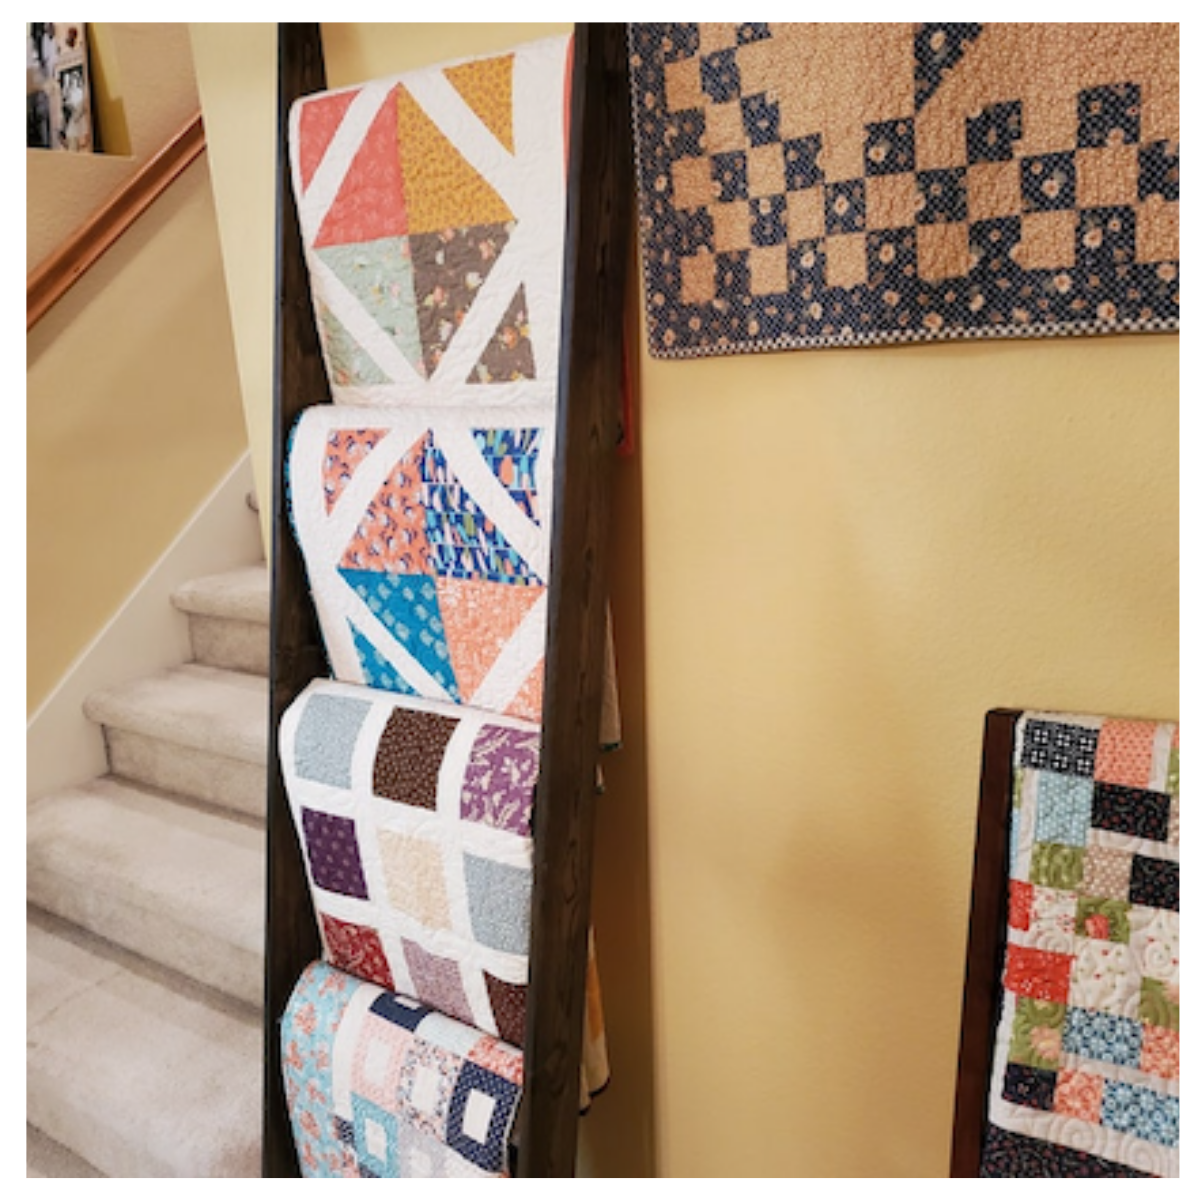 6 foot dark walnut stained blanket ladder. Four quilts are hung all with unique colorful patchwork.